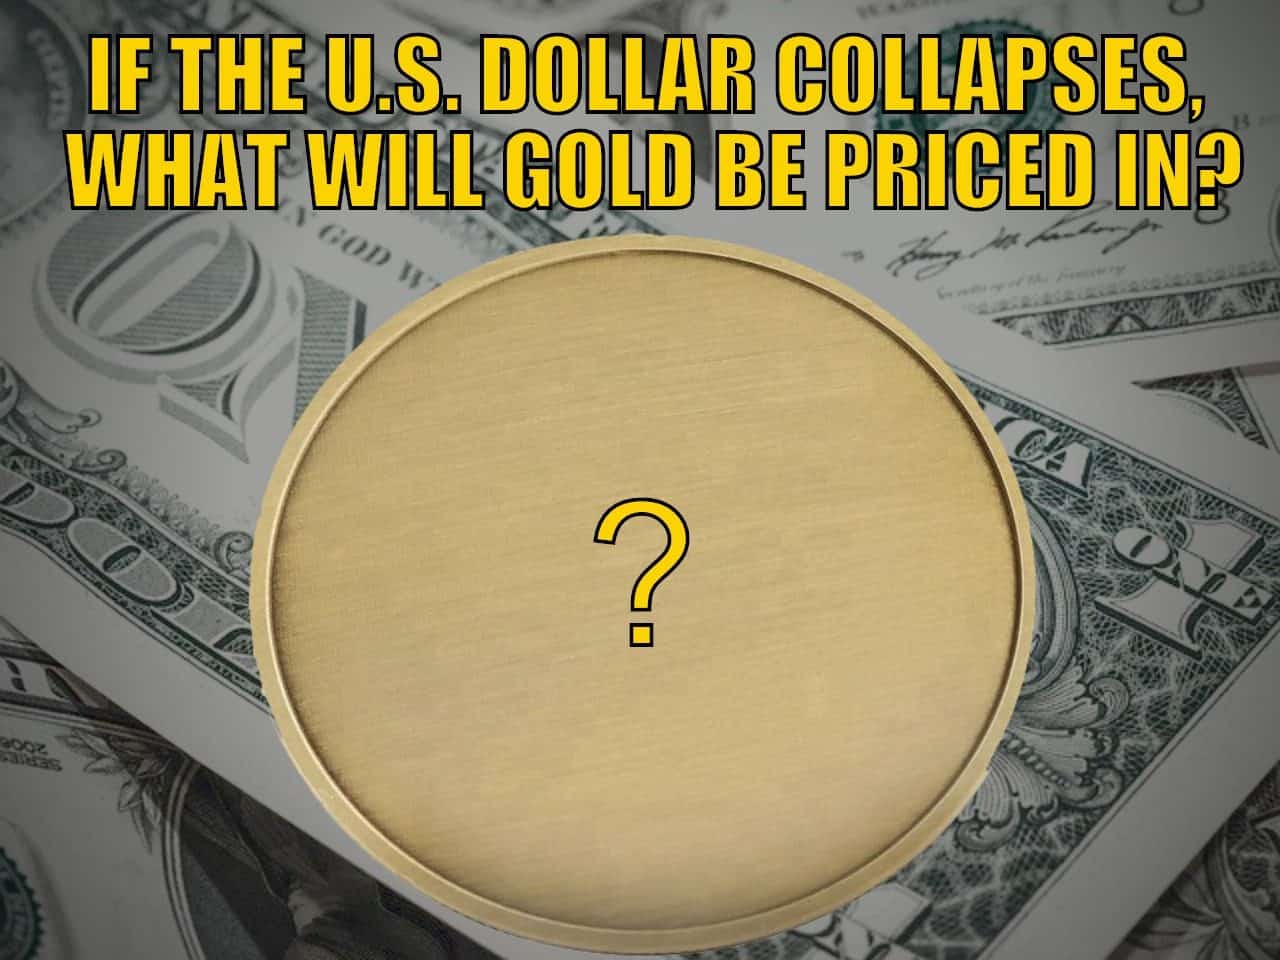 If/When the US Dollar Collapses, What Will Gold be Priced in?